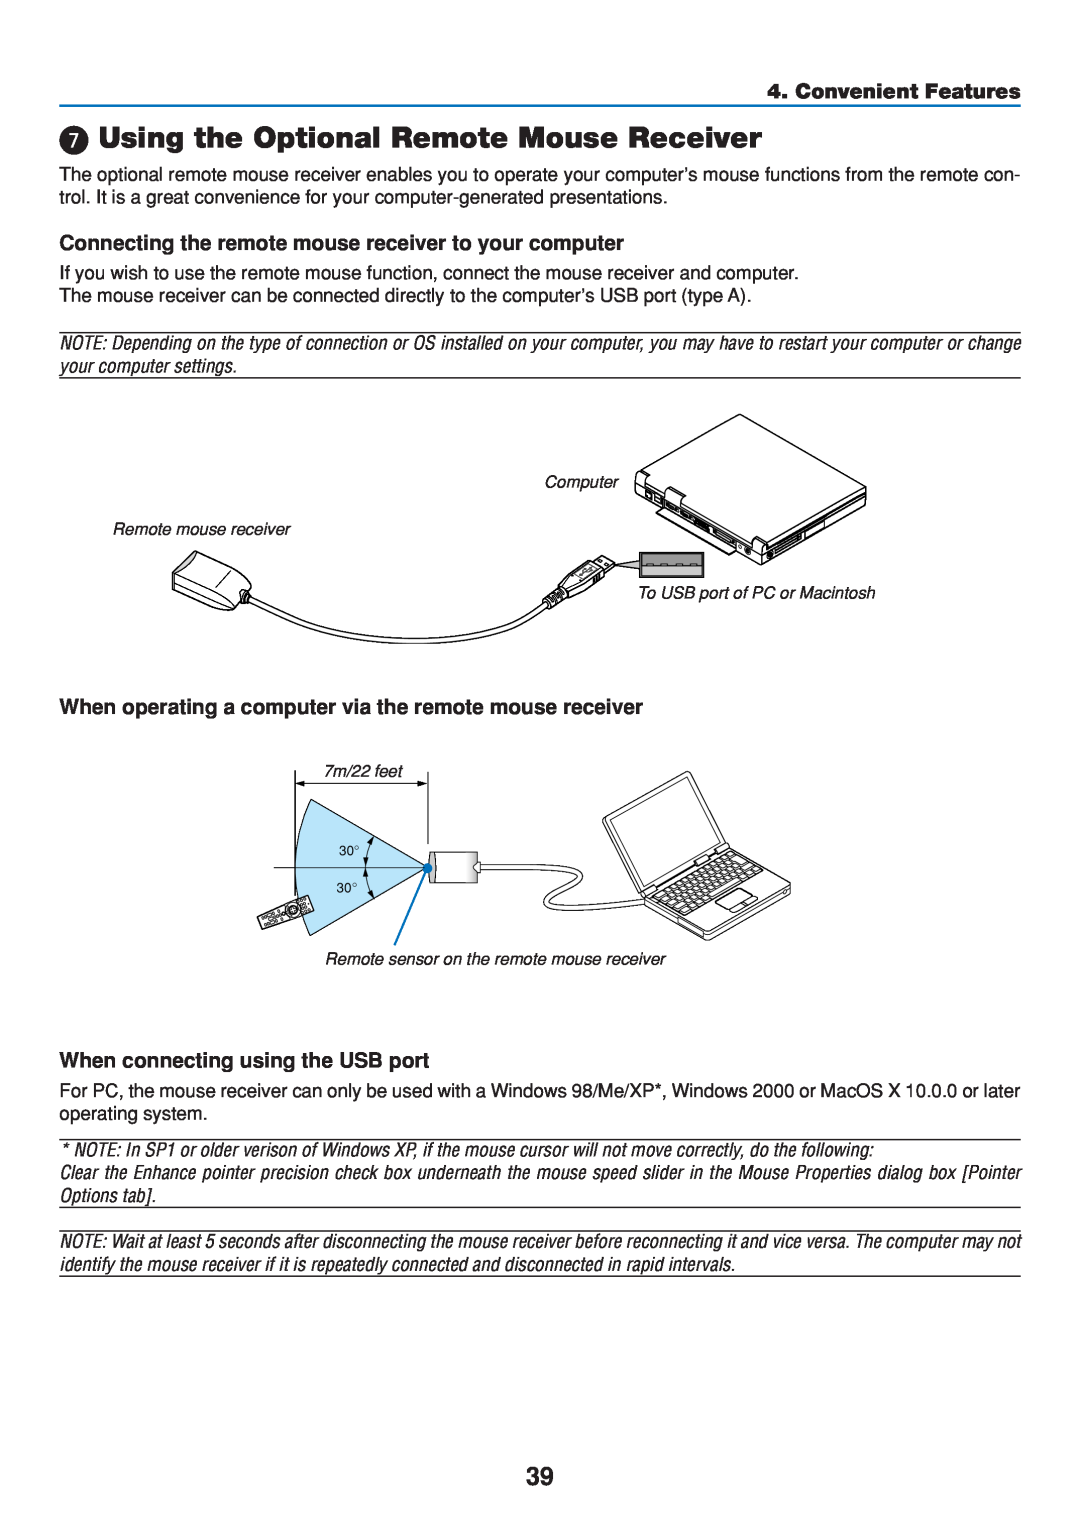 Dukane 8808 user manual Using the Optional Remote Mouse Receiver, Connecting the remote mouse receiver to your computer 